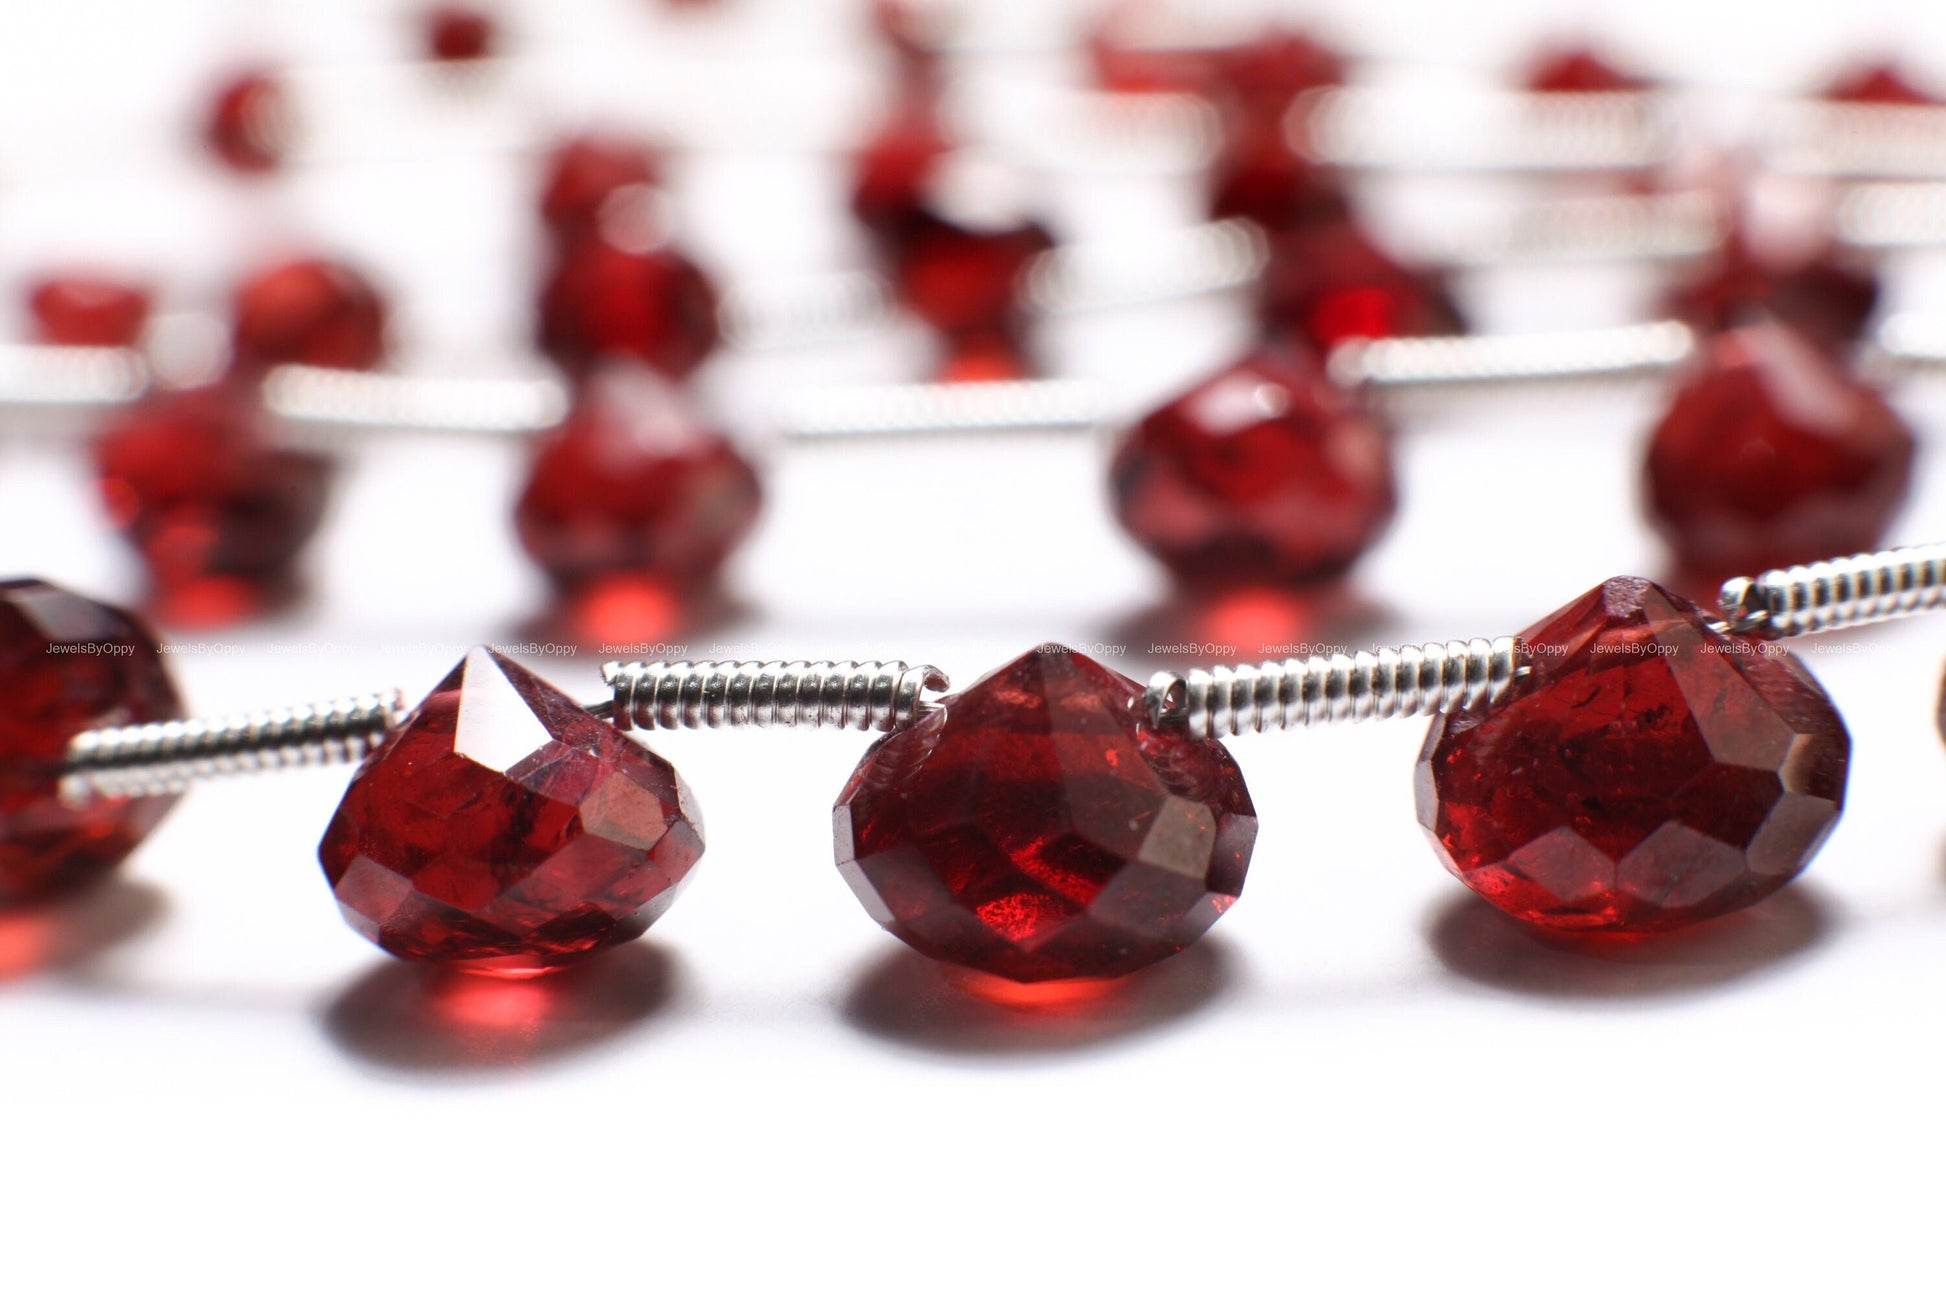 Mozambique Garnet AAA Micro Faceted Onion Drop 4.5-7.5mm , Jewelry Making Rich Dark Red Cut gems,January Birthstone, 6, 12 pieces St,